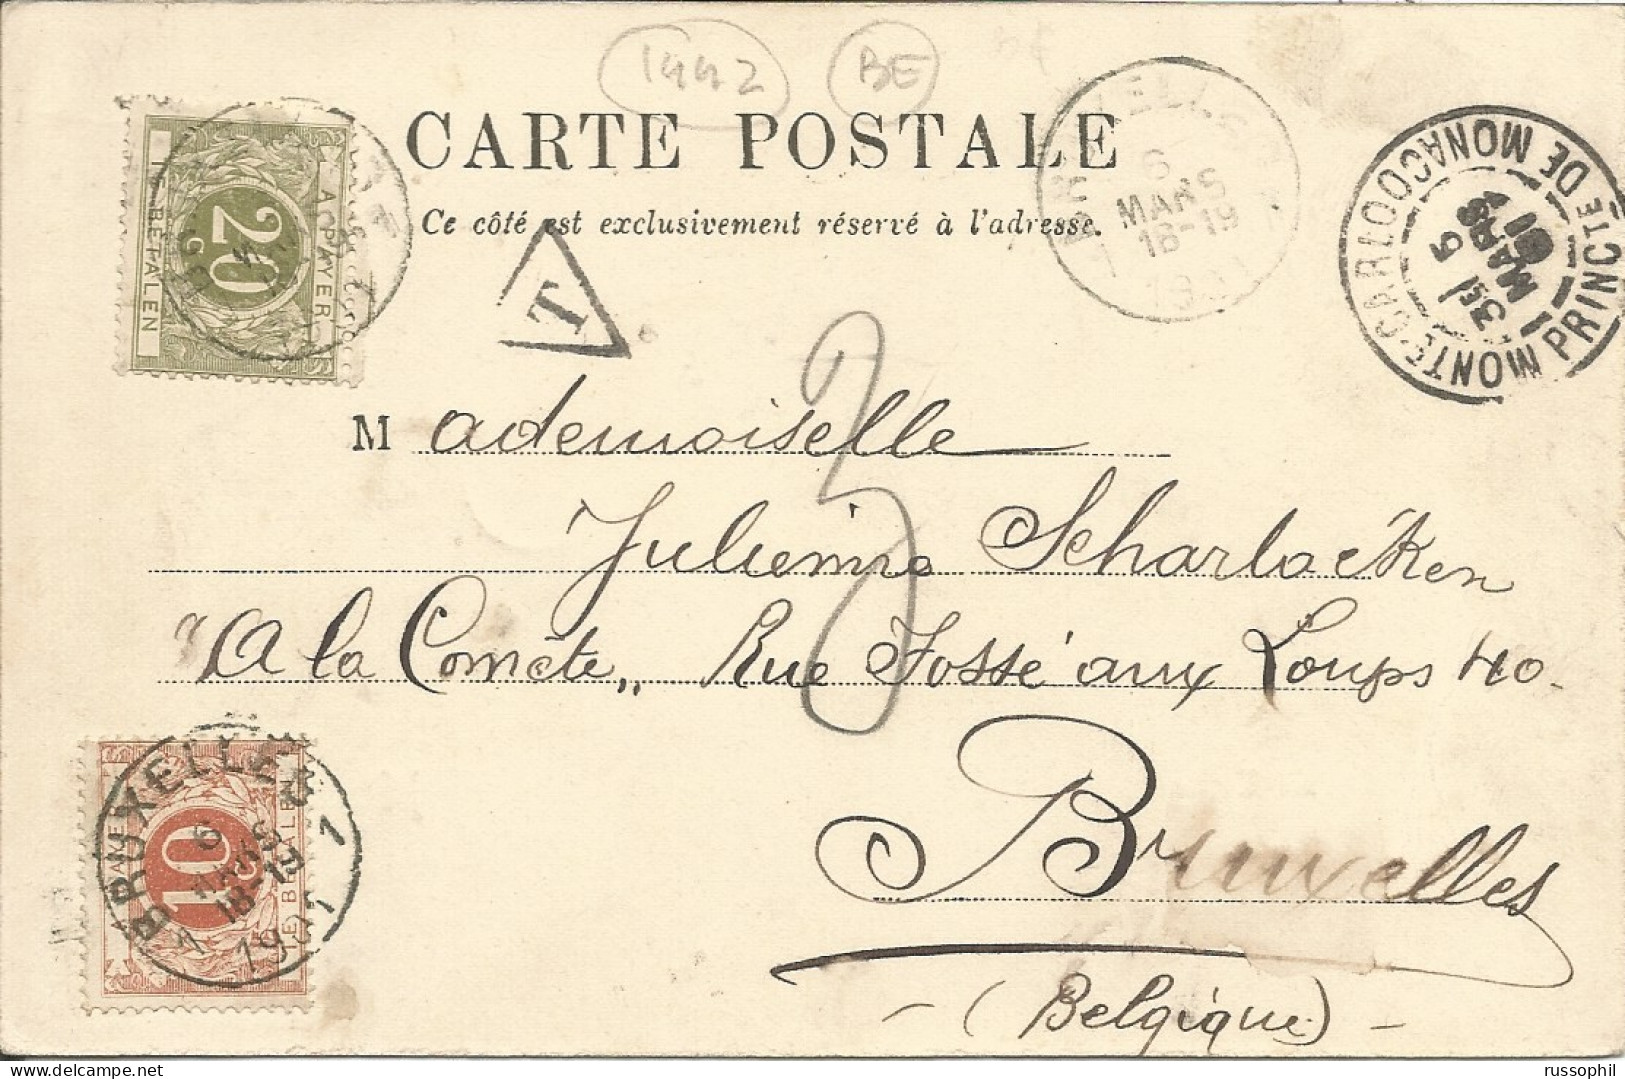 MONACO - "ROULETTE BELGE" CANCELLING Yv #14 ON PC (VIEW OF LA TURBIE) TO BELGIUM AND TAXED AT ARRIVAL - 1901 - Covers & Documents